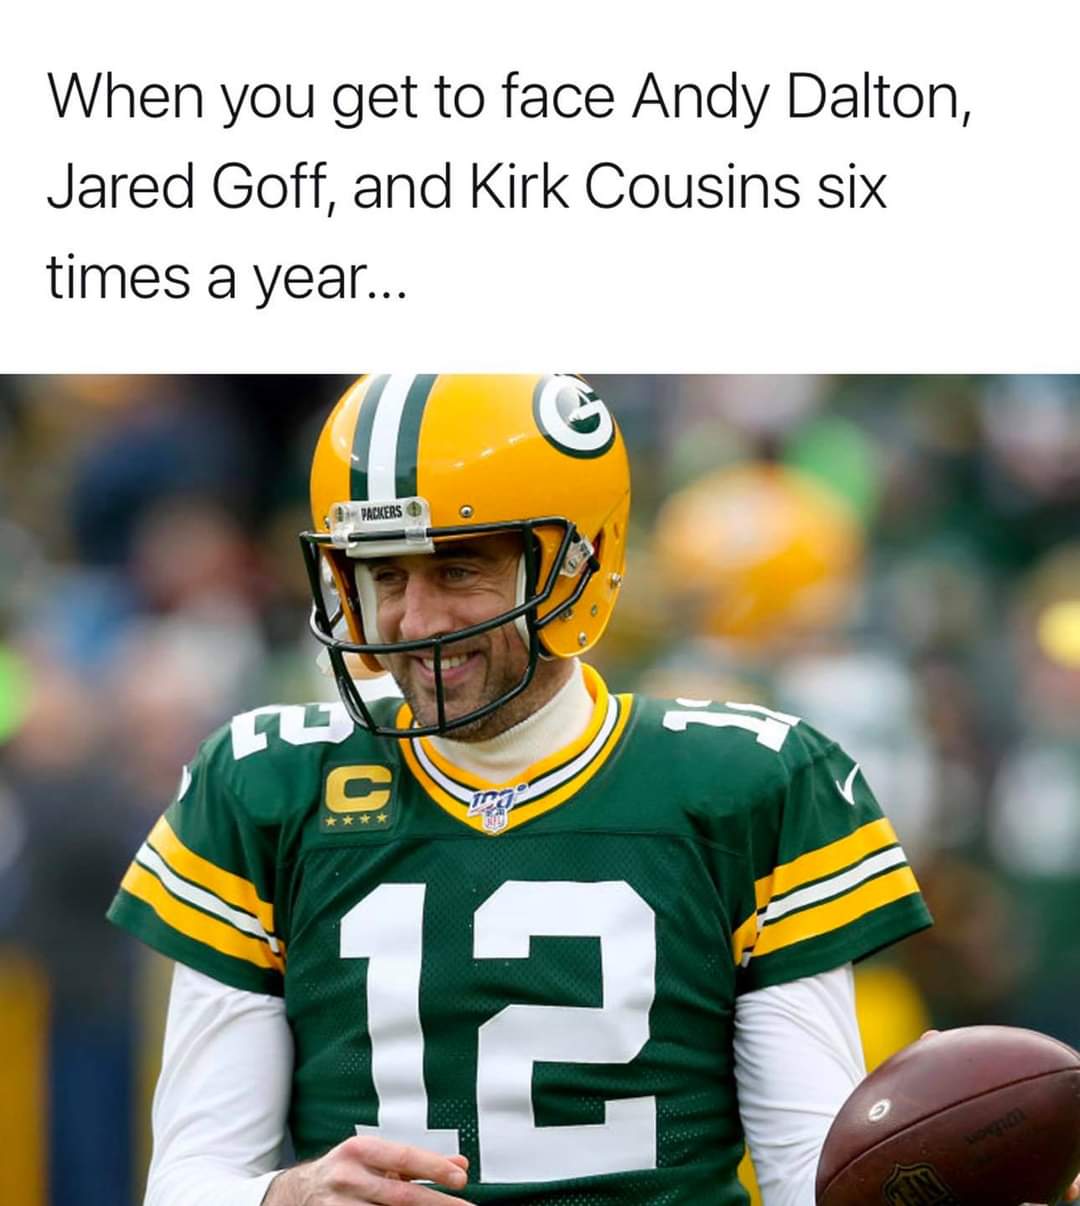 jersey - When you get to face Andy Dalton, Jared Goff, and Kirk Cousins six times a year... Packers 12